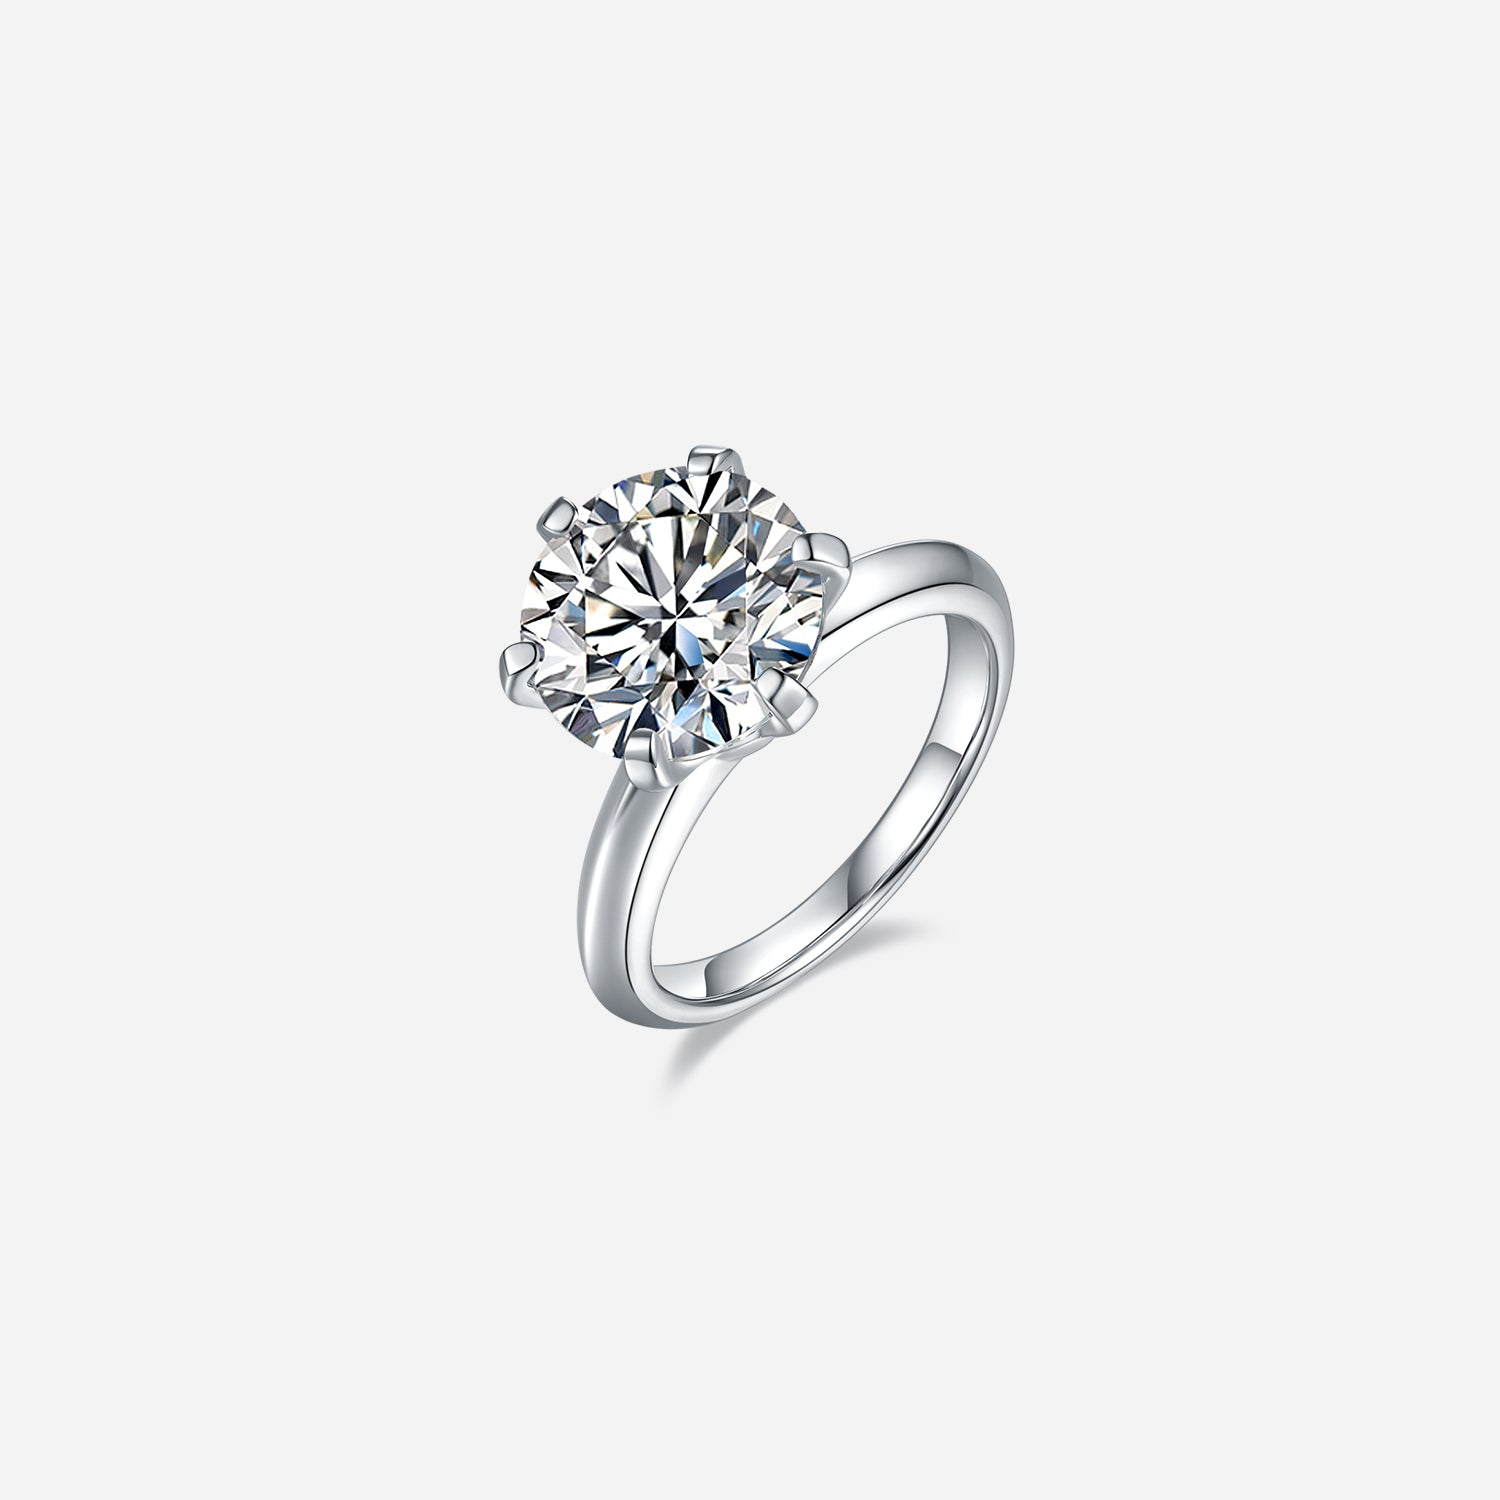 5-Carat Moissanite round solitaire set in sterling silver.